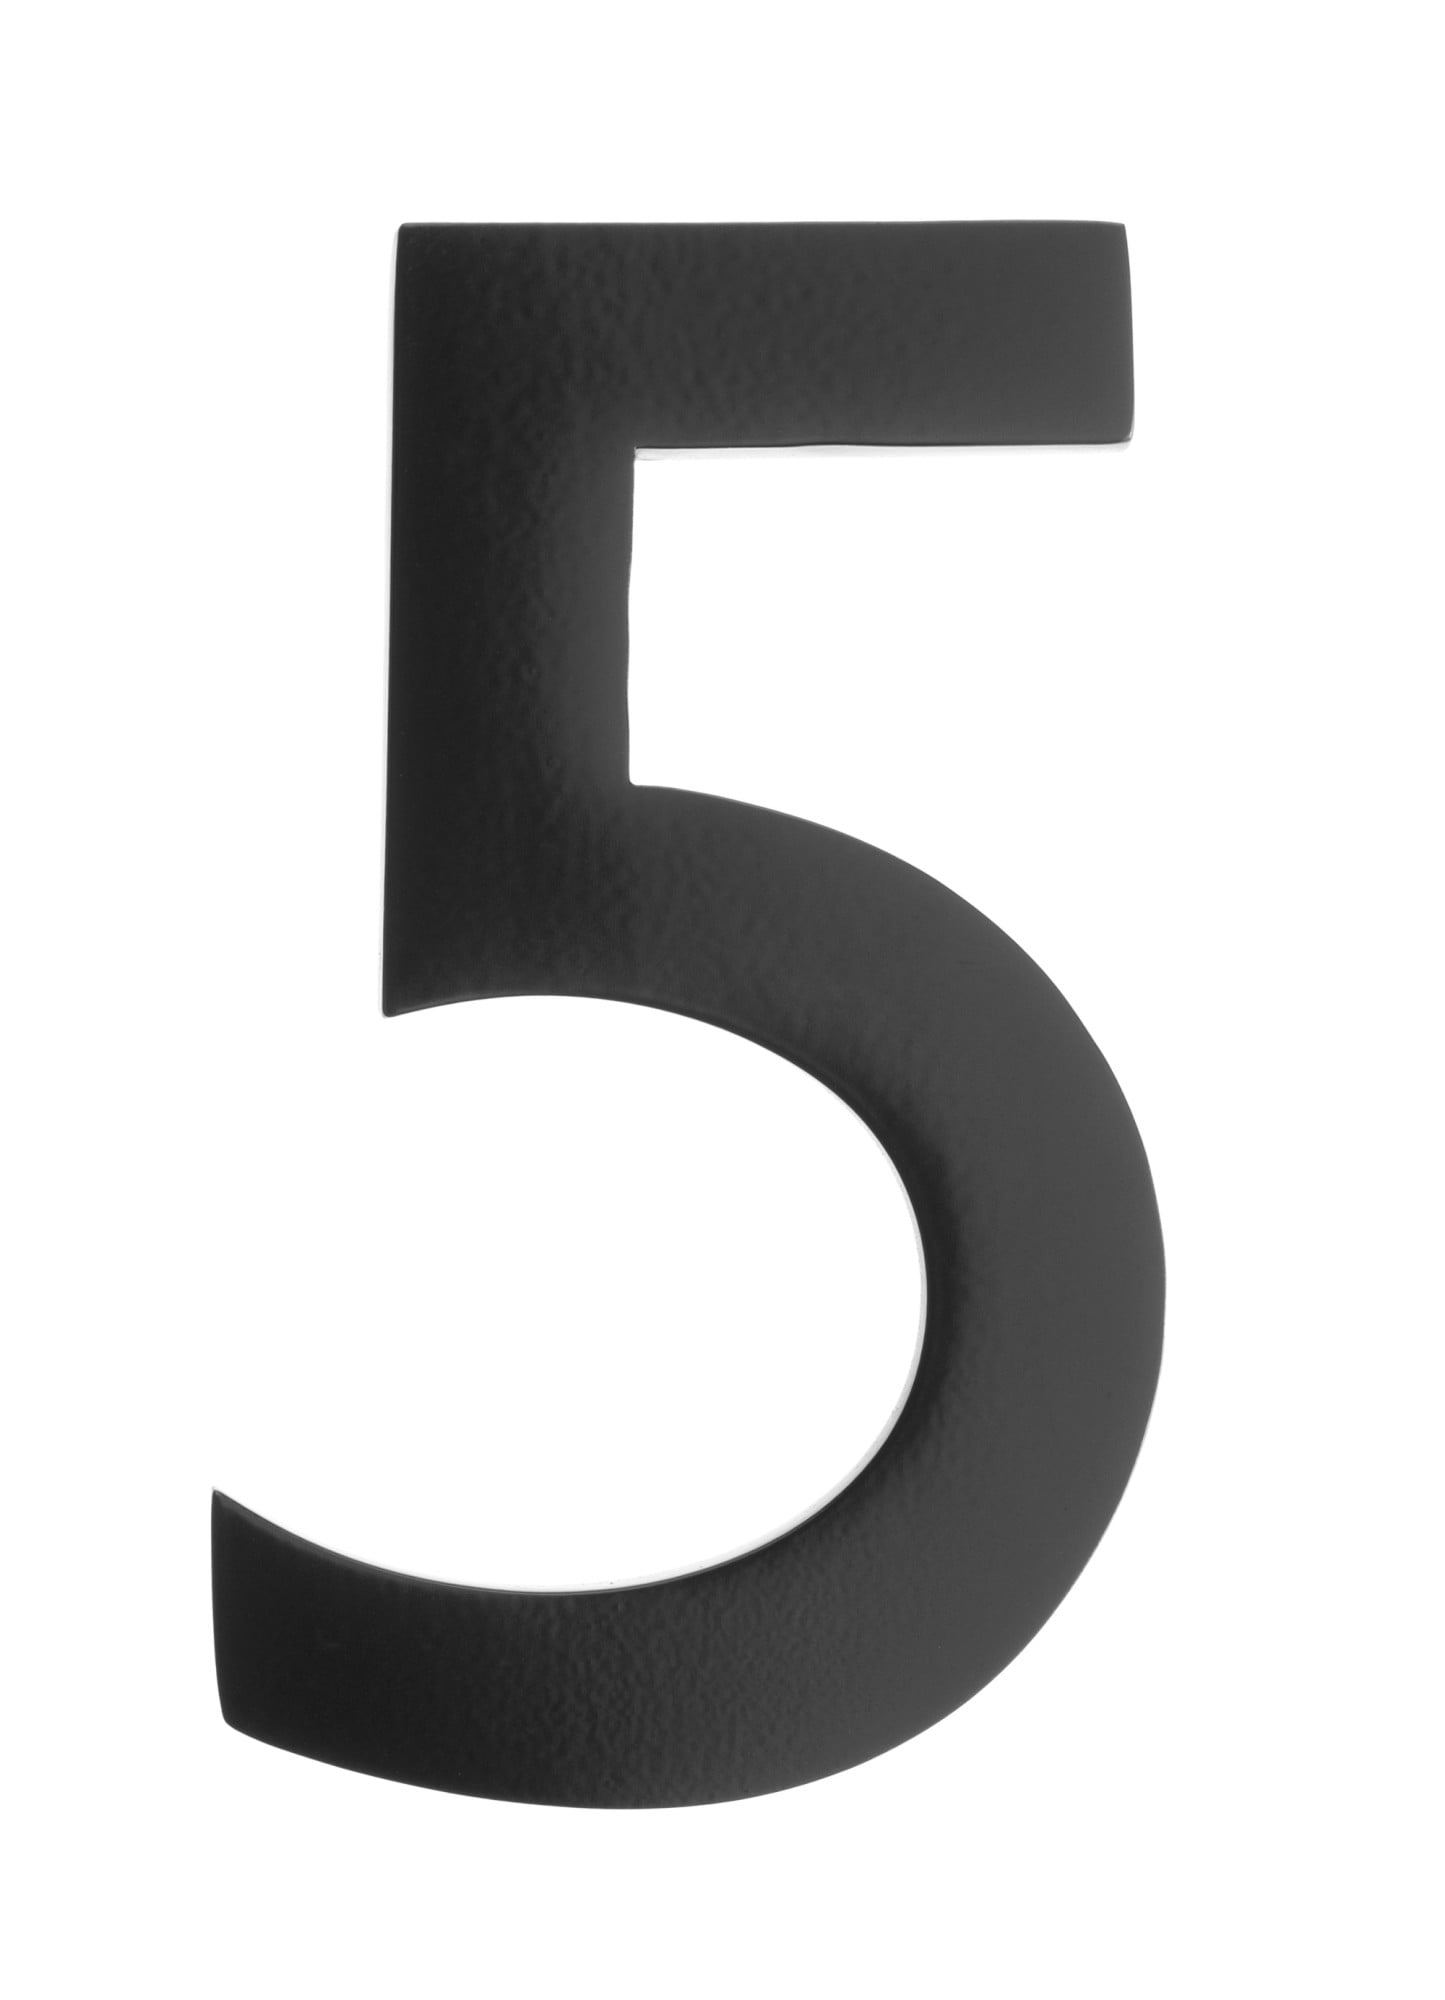 3582b-5 Floating House Number 5, Black - 4 In.